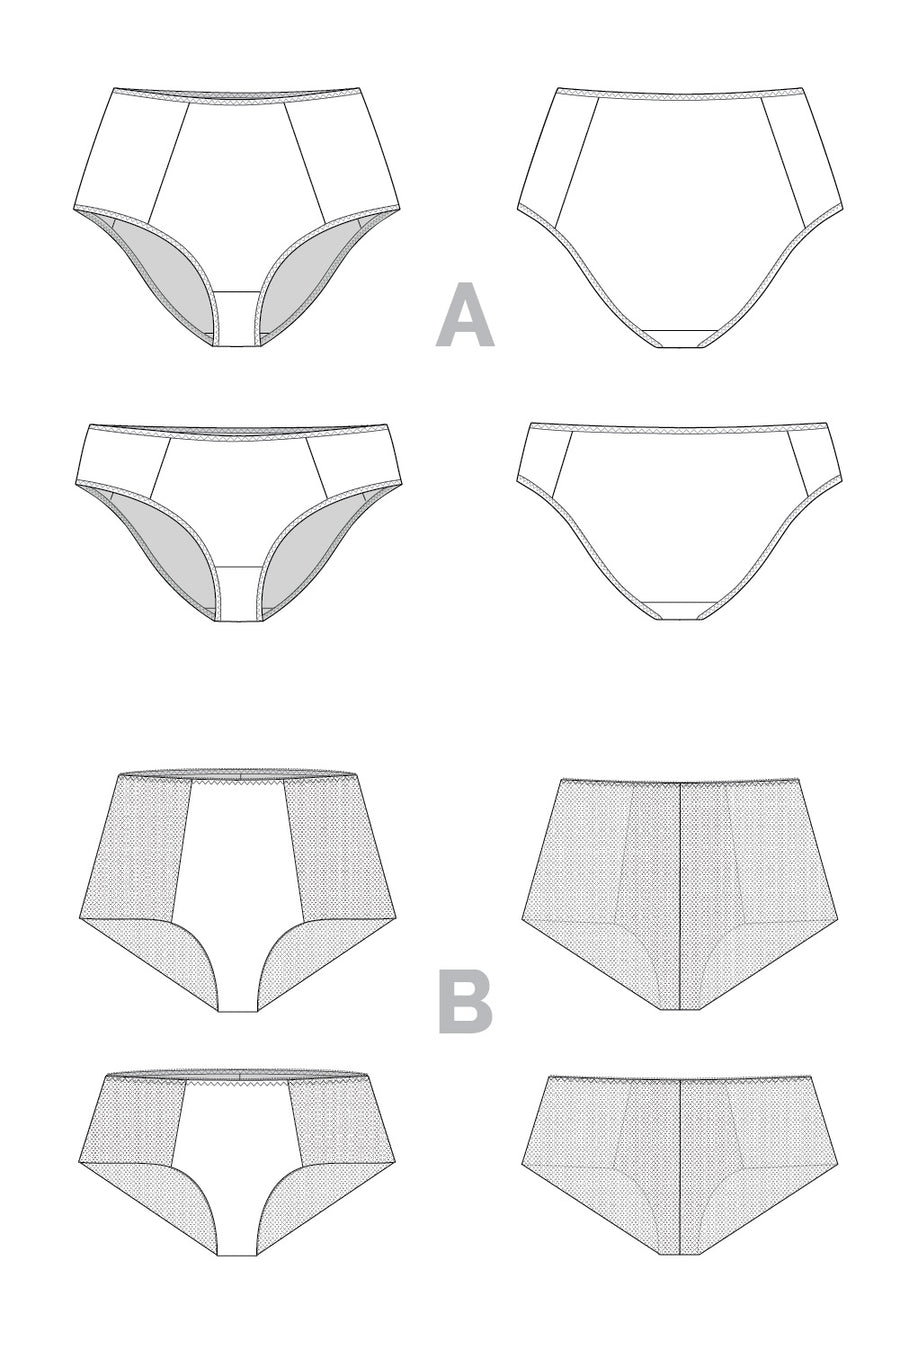 Wendy Ladies/women's Knickers Size XS to 5XL Underwear PDF Sewing Pattern  Tutorial Panties, Undies, Brief, Thong, A4, A0, Projector Files -   Canada